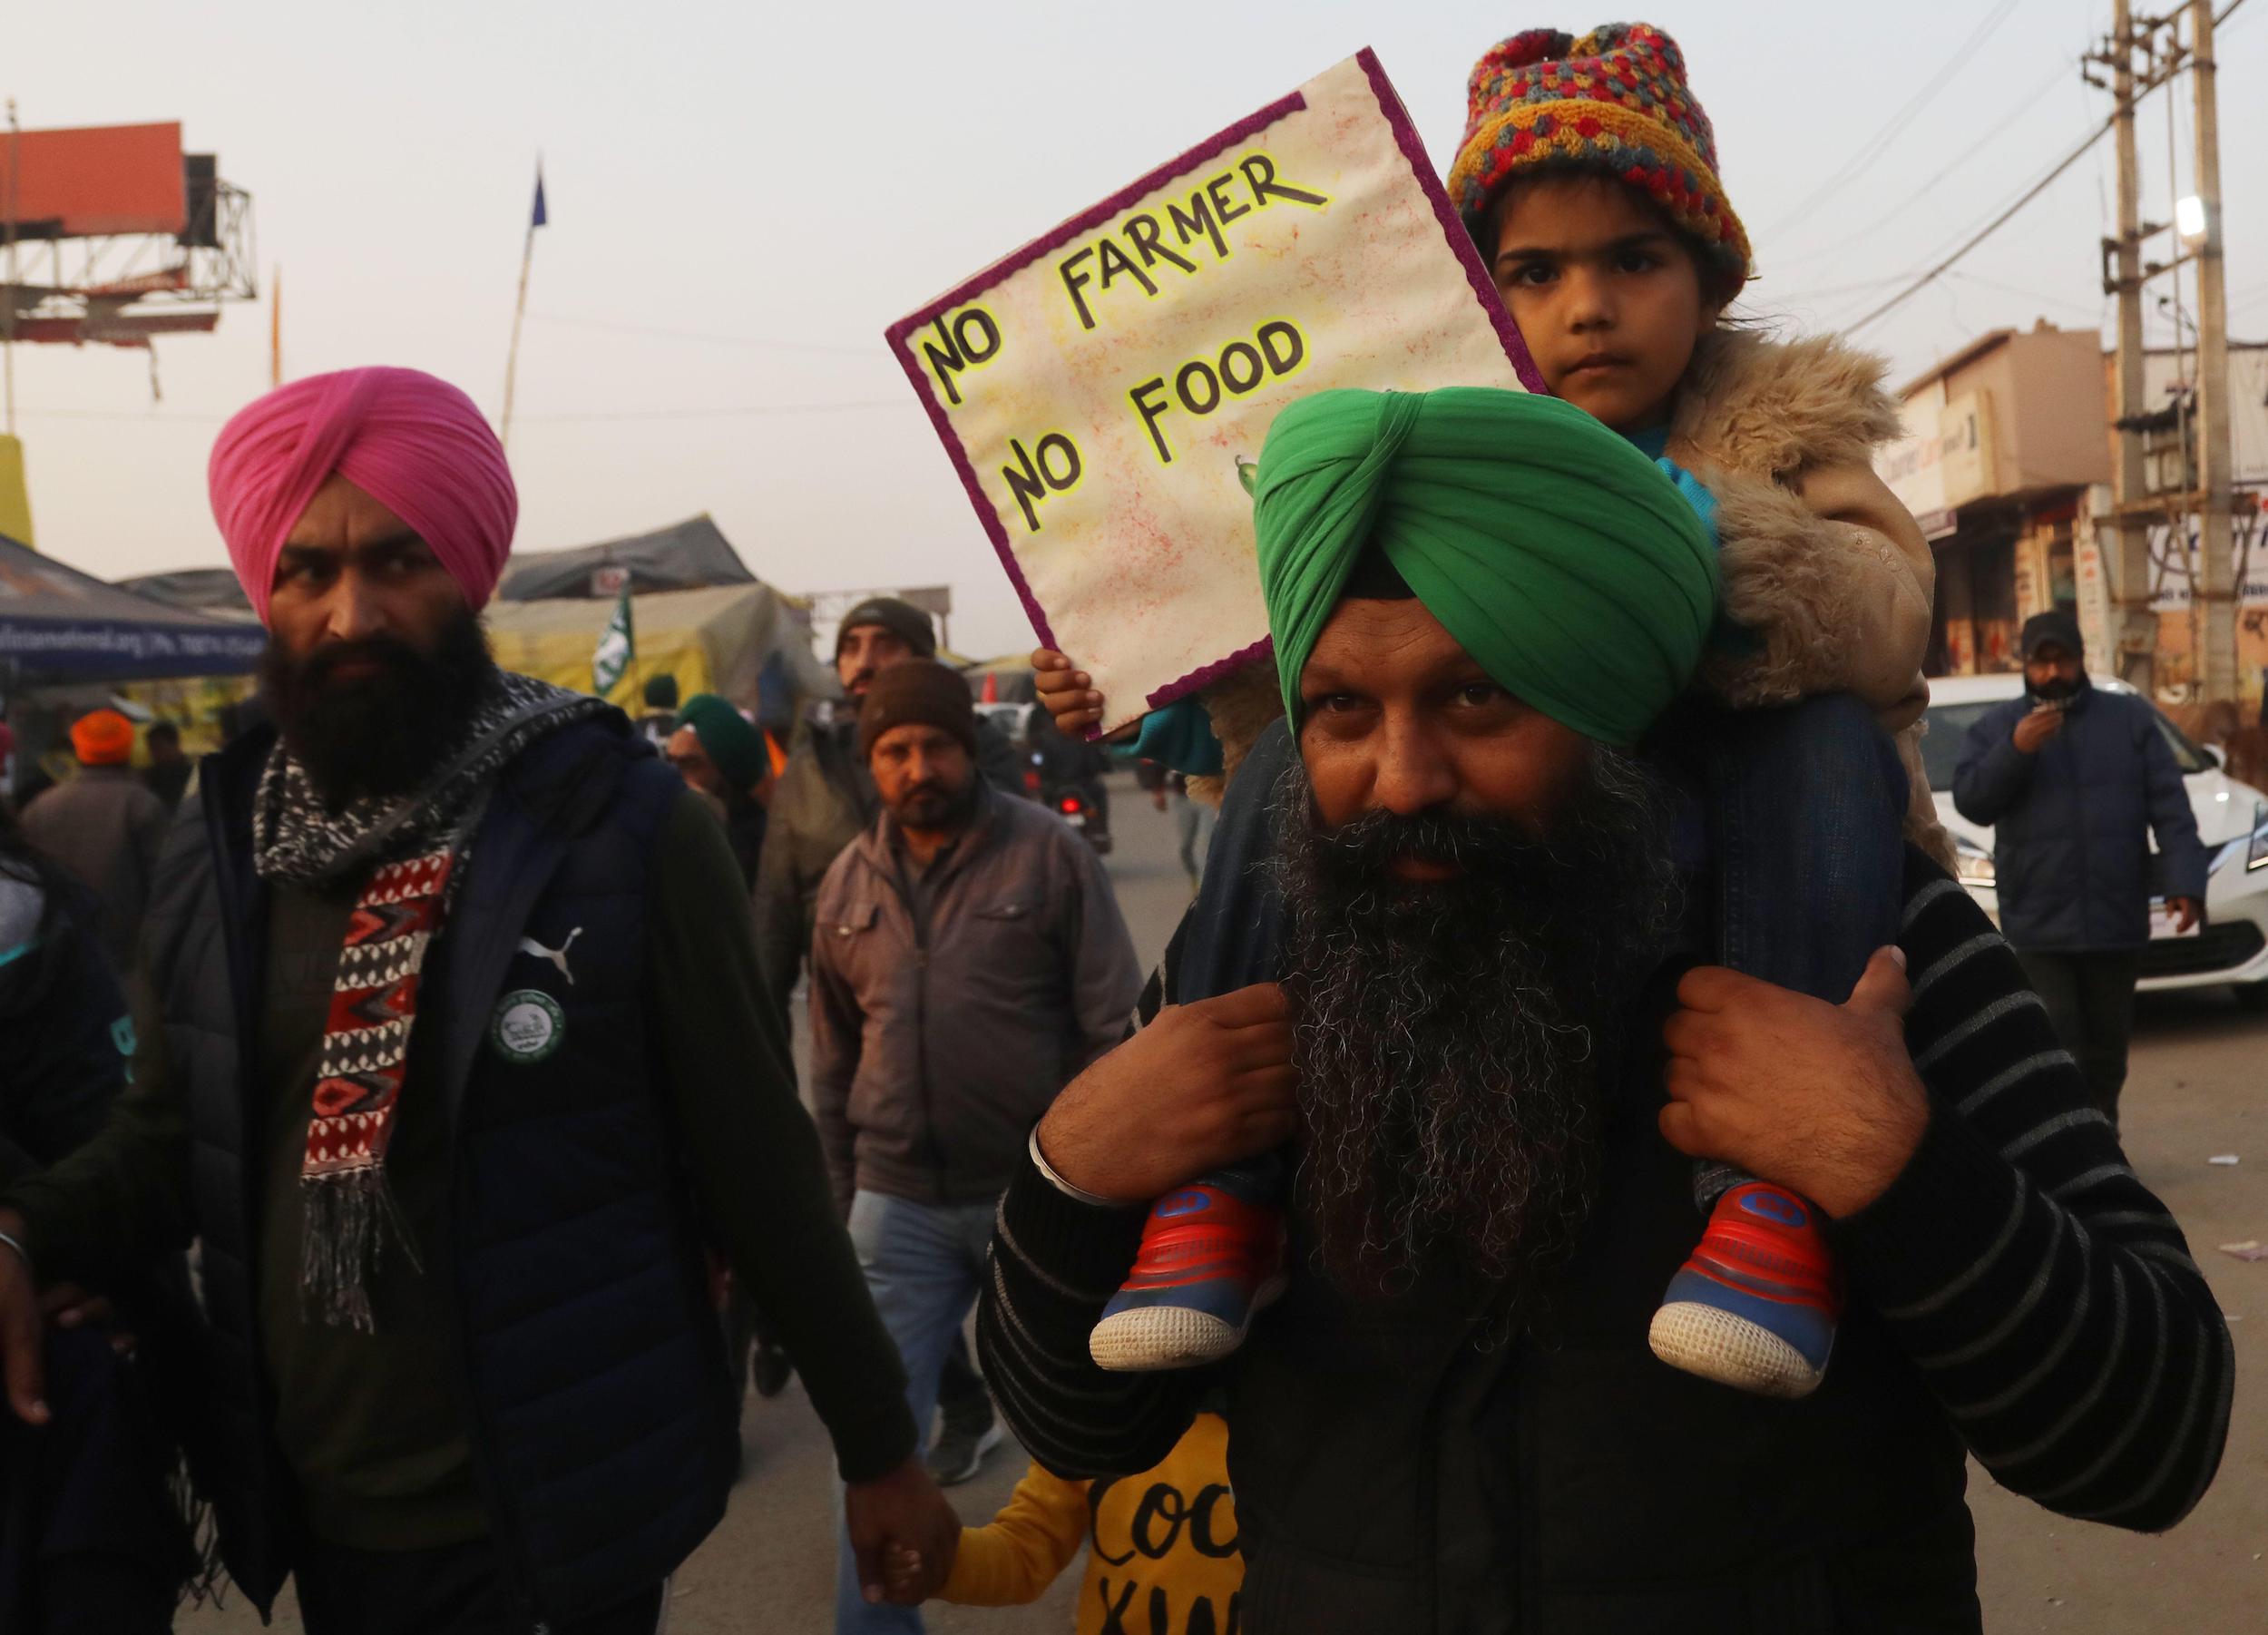 <p>Protesters in New Delhi, India, January 2021 [Image by: Naveen Sharma/SOPA Images via ZUMA Wire]</p>